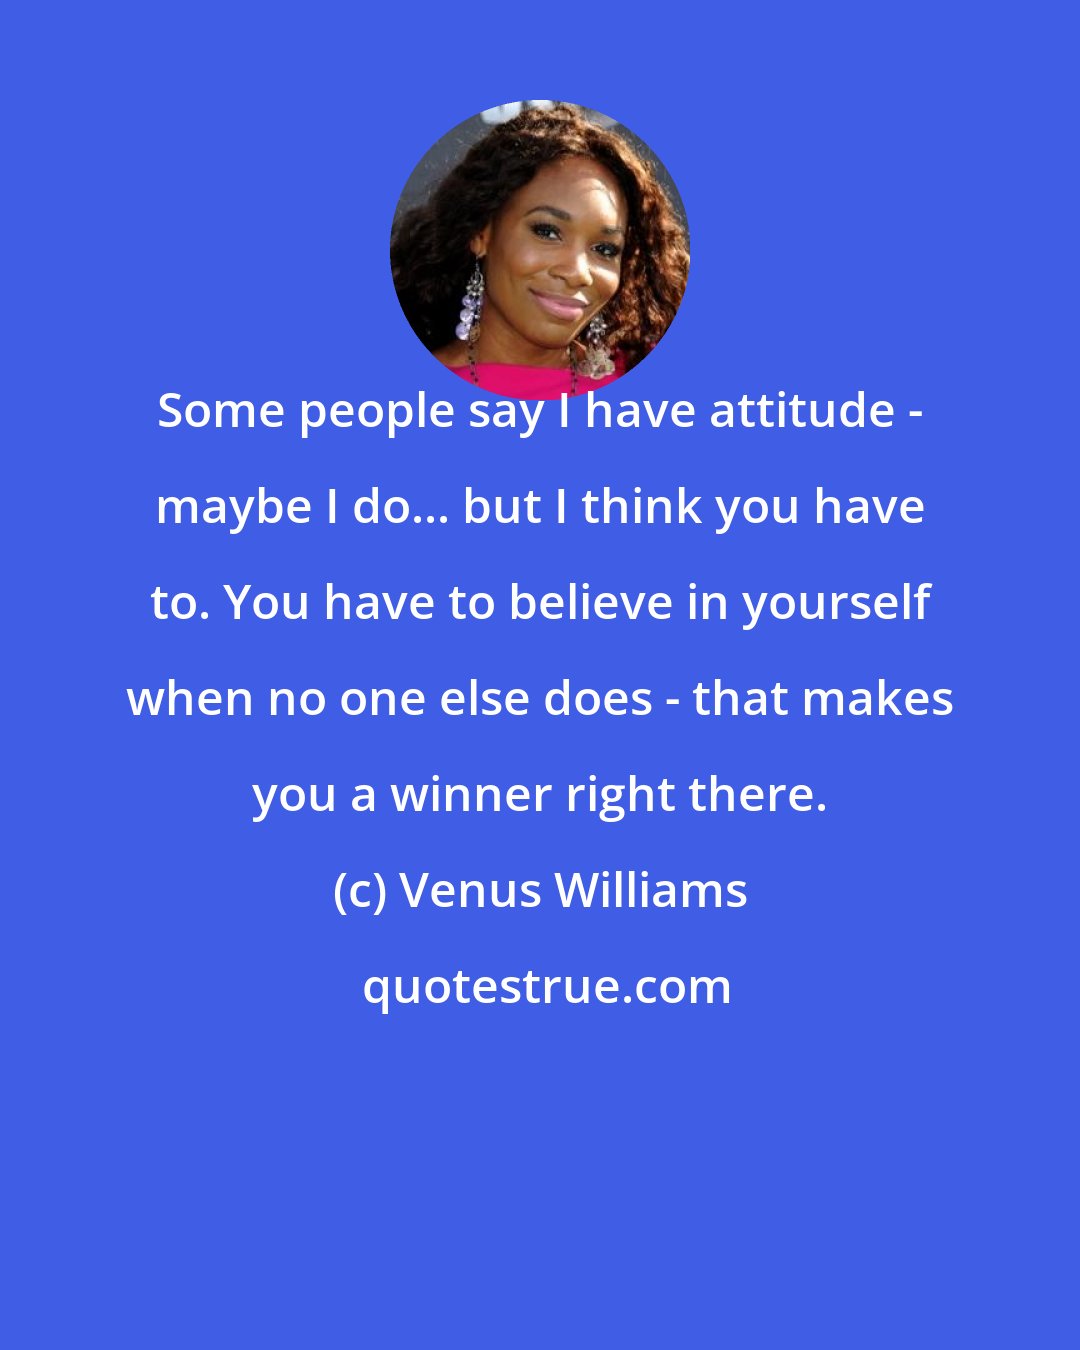 Venus Williams: Some people say I have attitude - maybe I do... but I think you have to. You have to believe in yourself when no one else does - that makes you a winner right there.